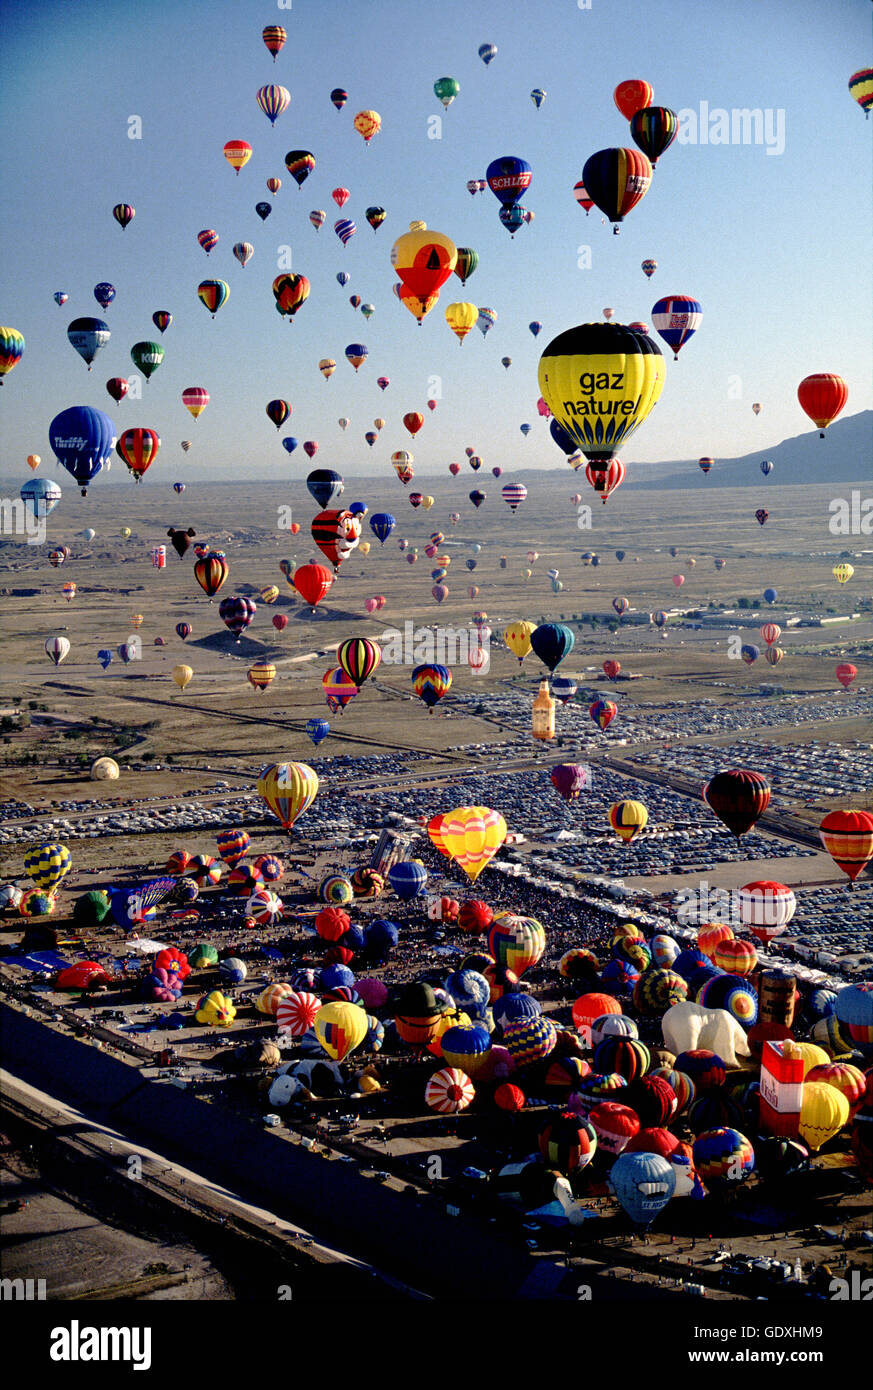 mass-ascension-of-hot-air-balloons-at-the-albuquerque-international-GDXHM9.jpg